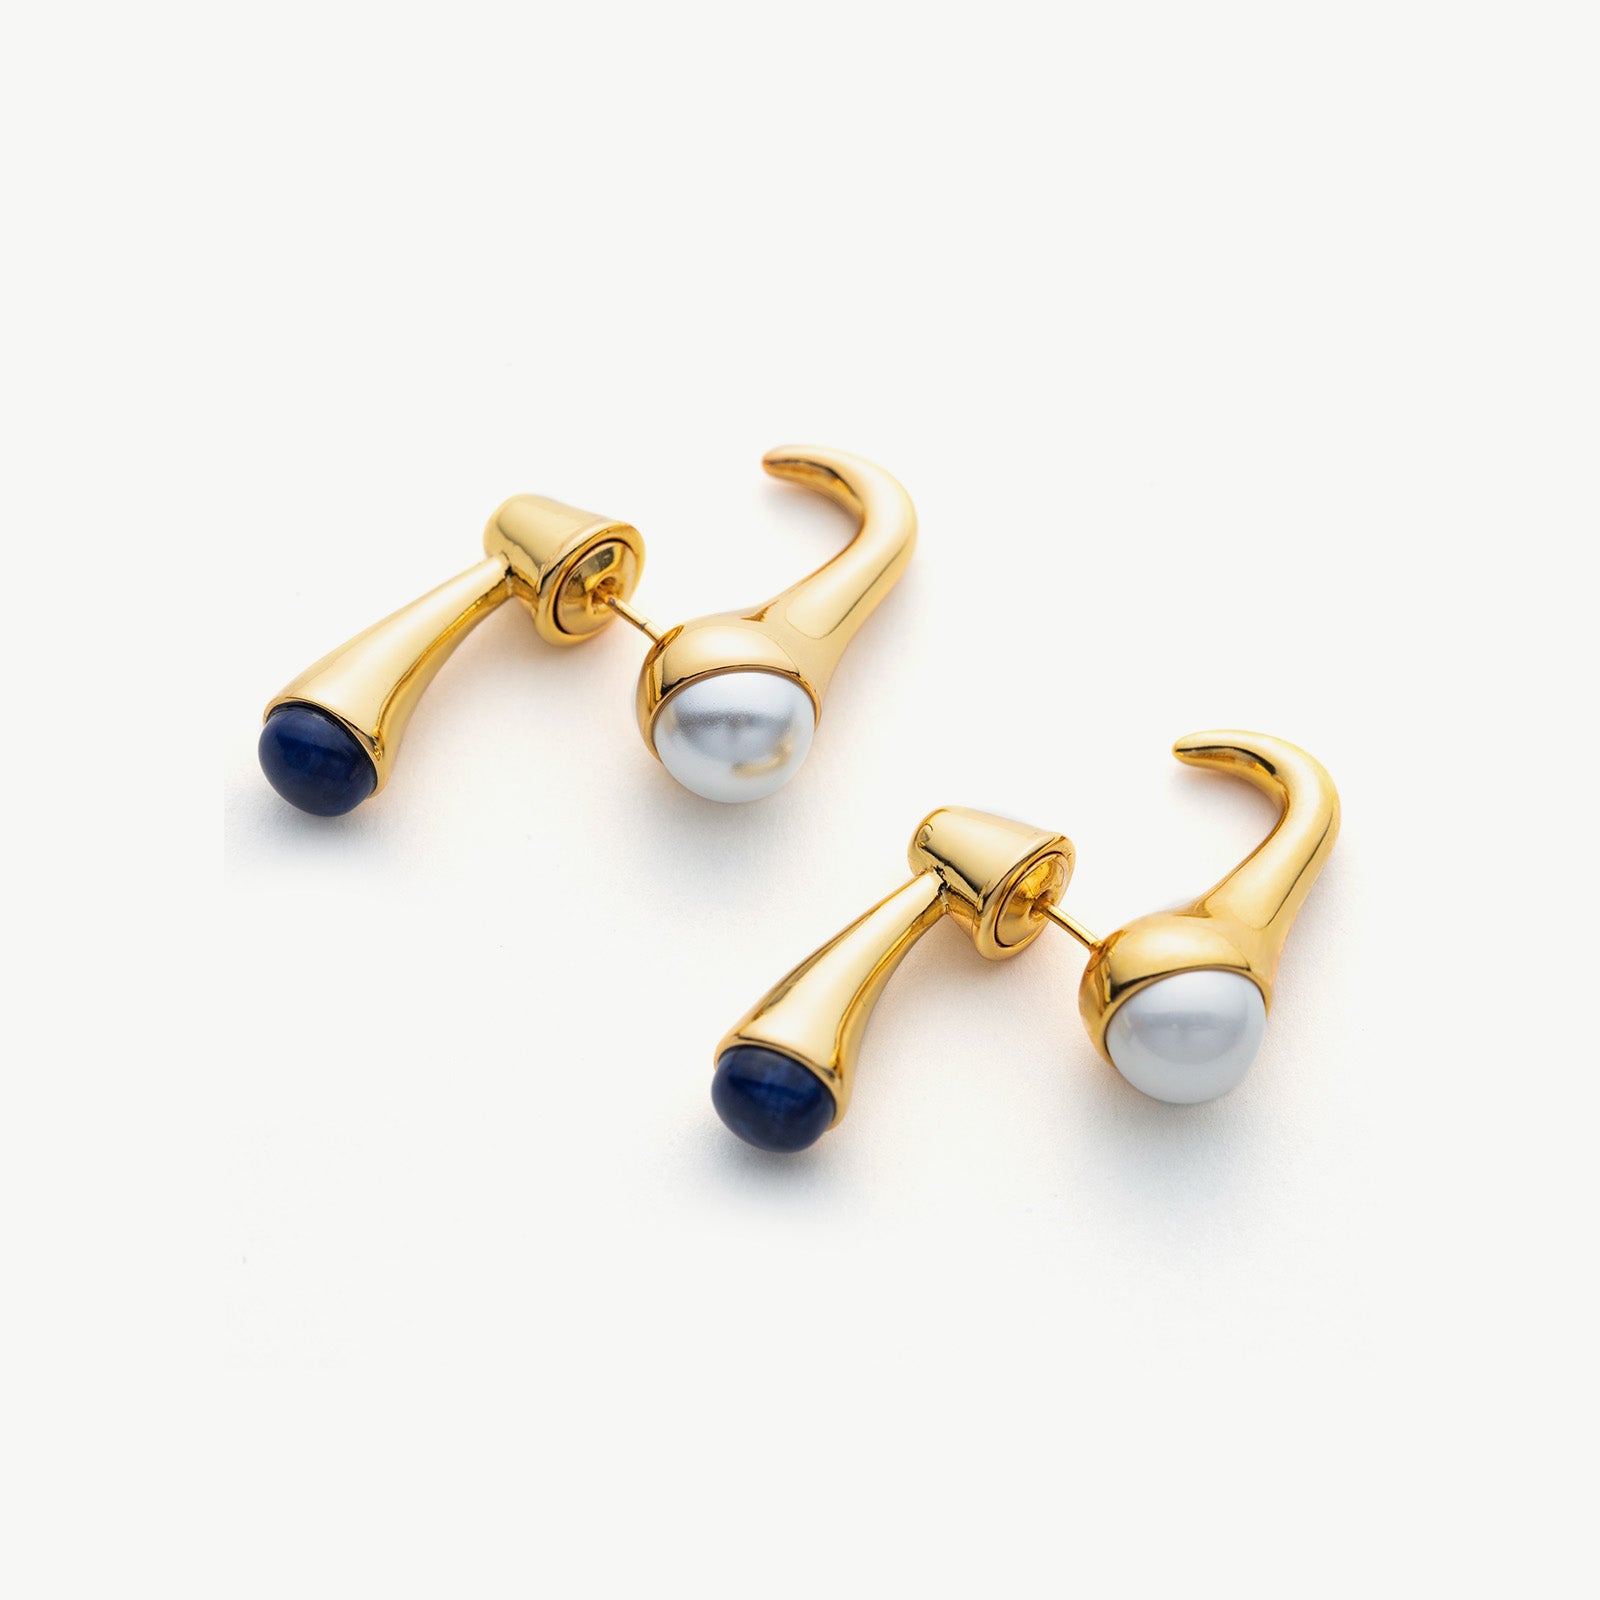 Pearl Crossover Hoop Earrings, a chic and stylish choice that showcases an embrace of pearls in a trendy crossover pattern for a fashionable look